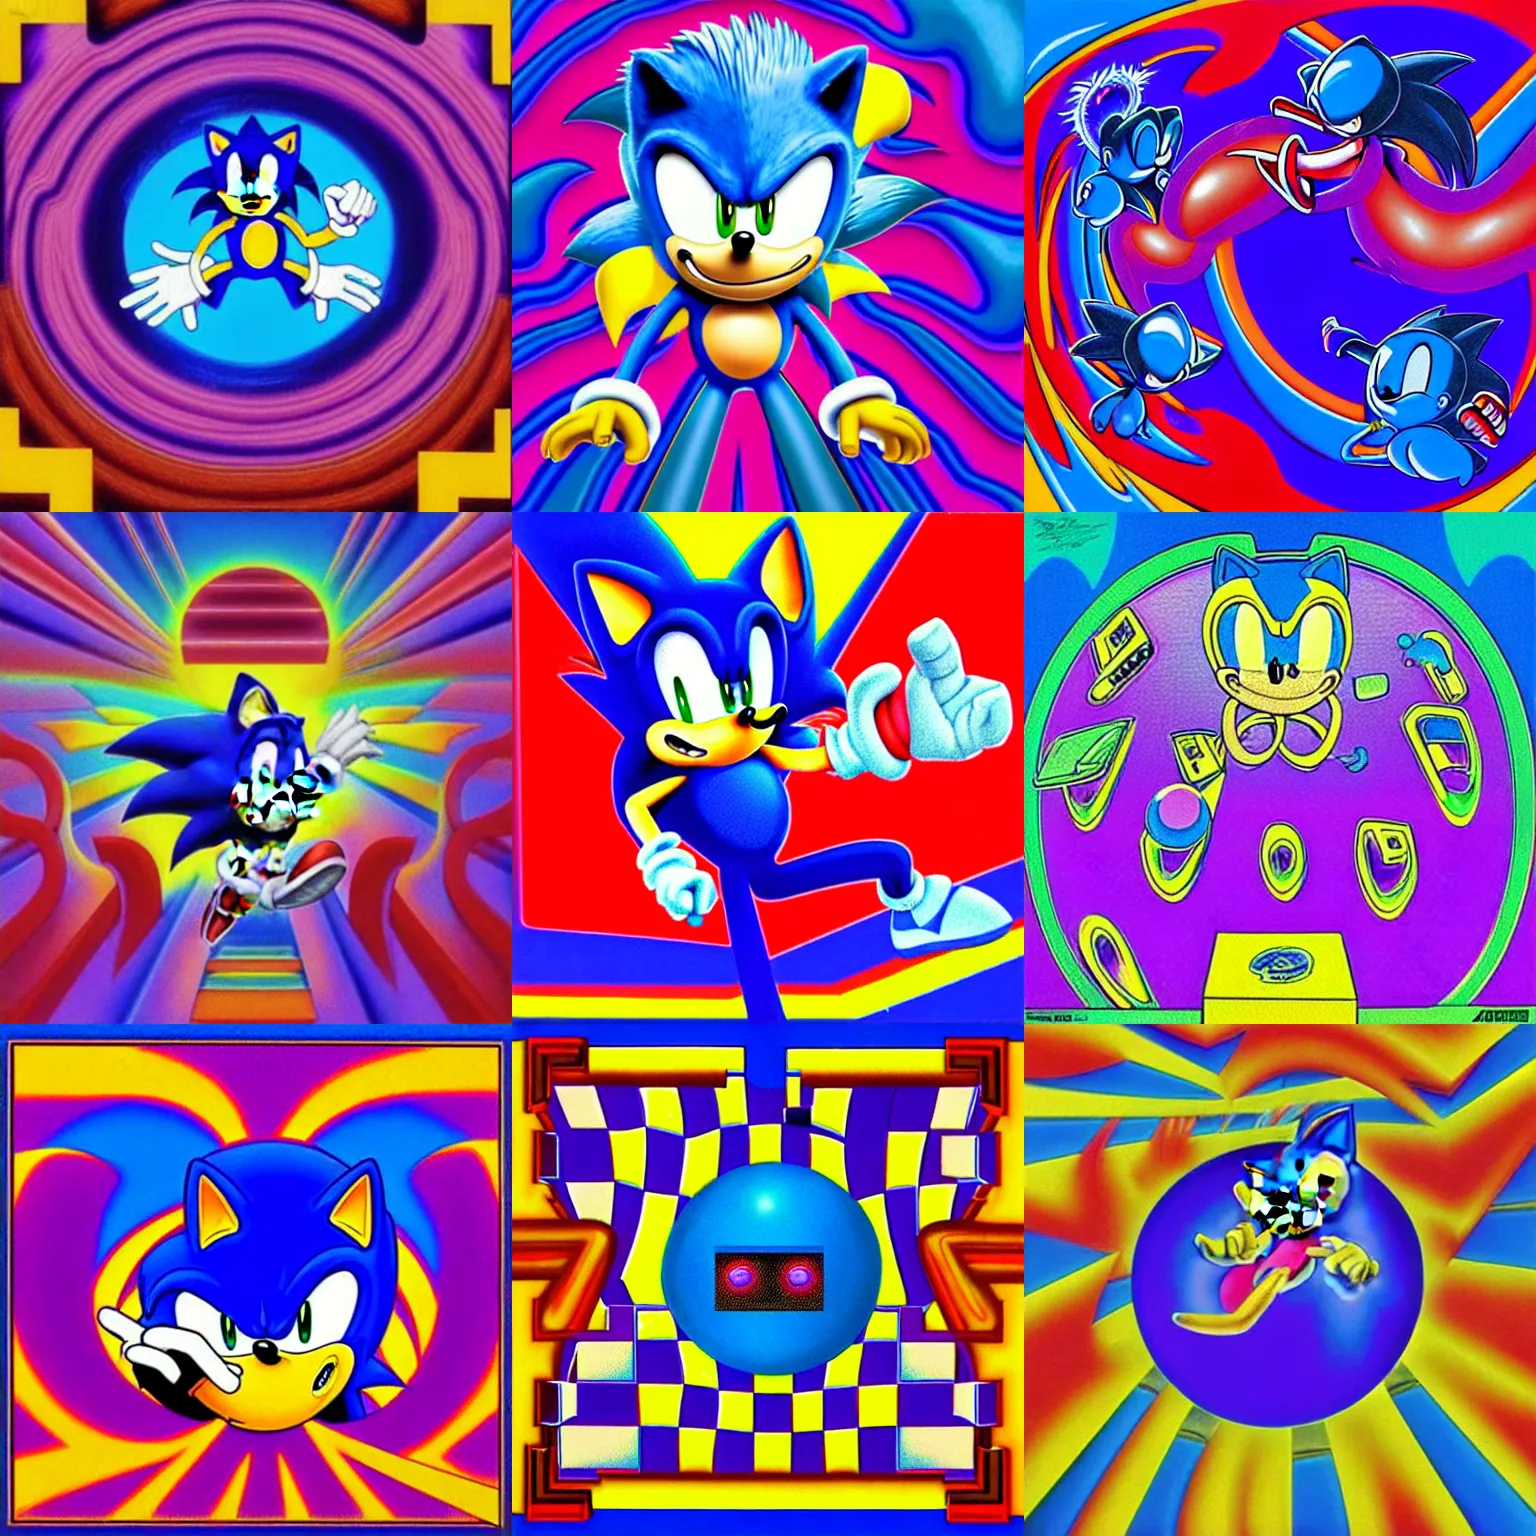 Prompt: surreal, sharp, lowbrow, detailed professional, high quality airbrush art mgmt sonic the hedgehog album cover of a liquid dissolving lsd dmt blue sonic the hedgehog falling through a mirror ocean, purple checkerboard background, 1 9 9 0 s 1 9 9 2 acid house techno sega genesis video game album cover